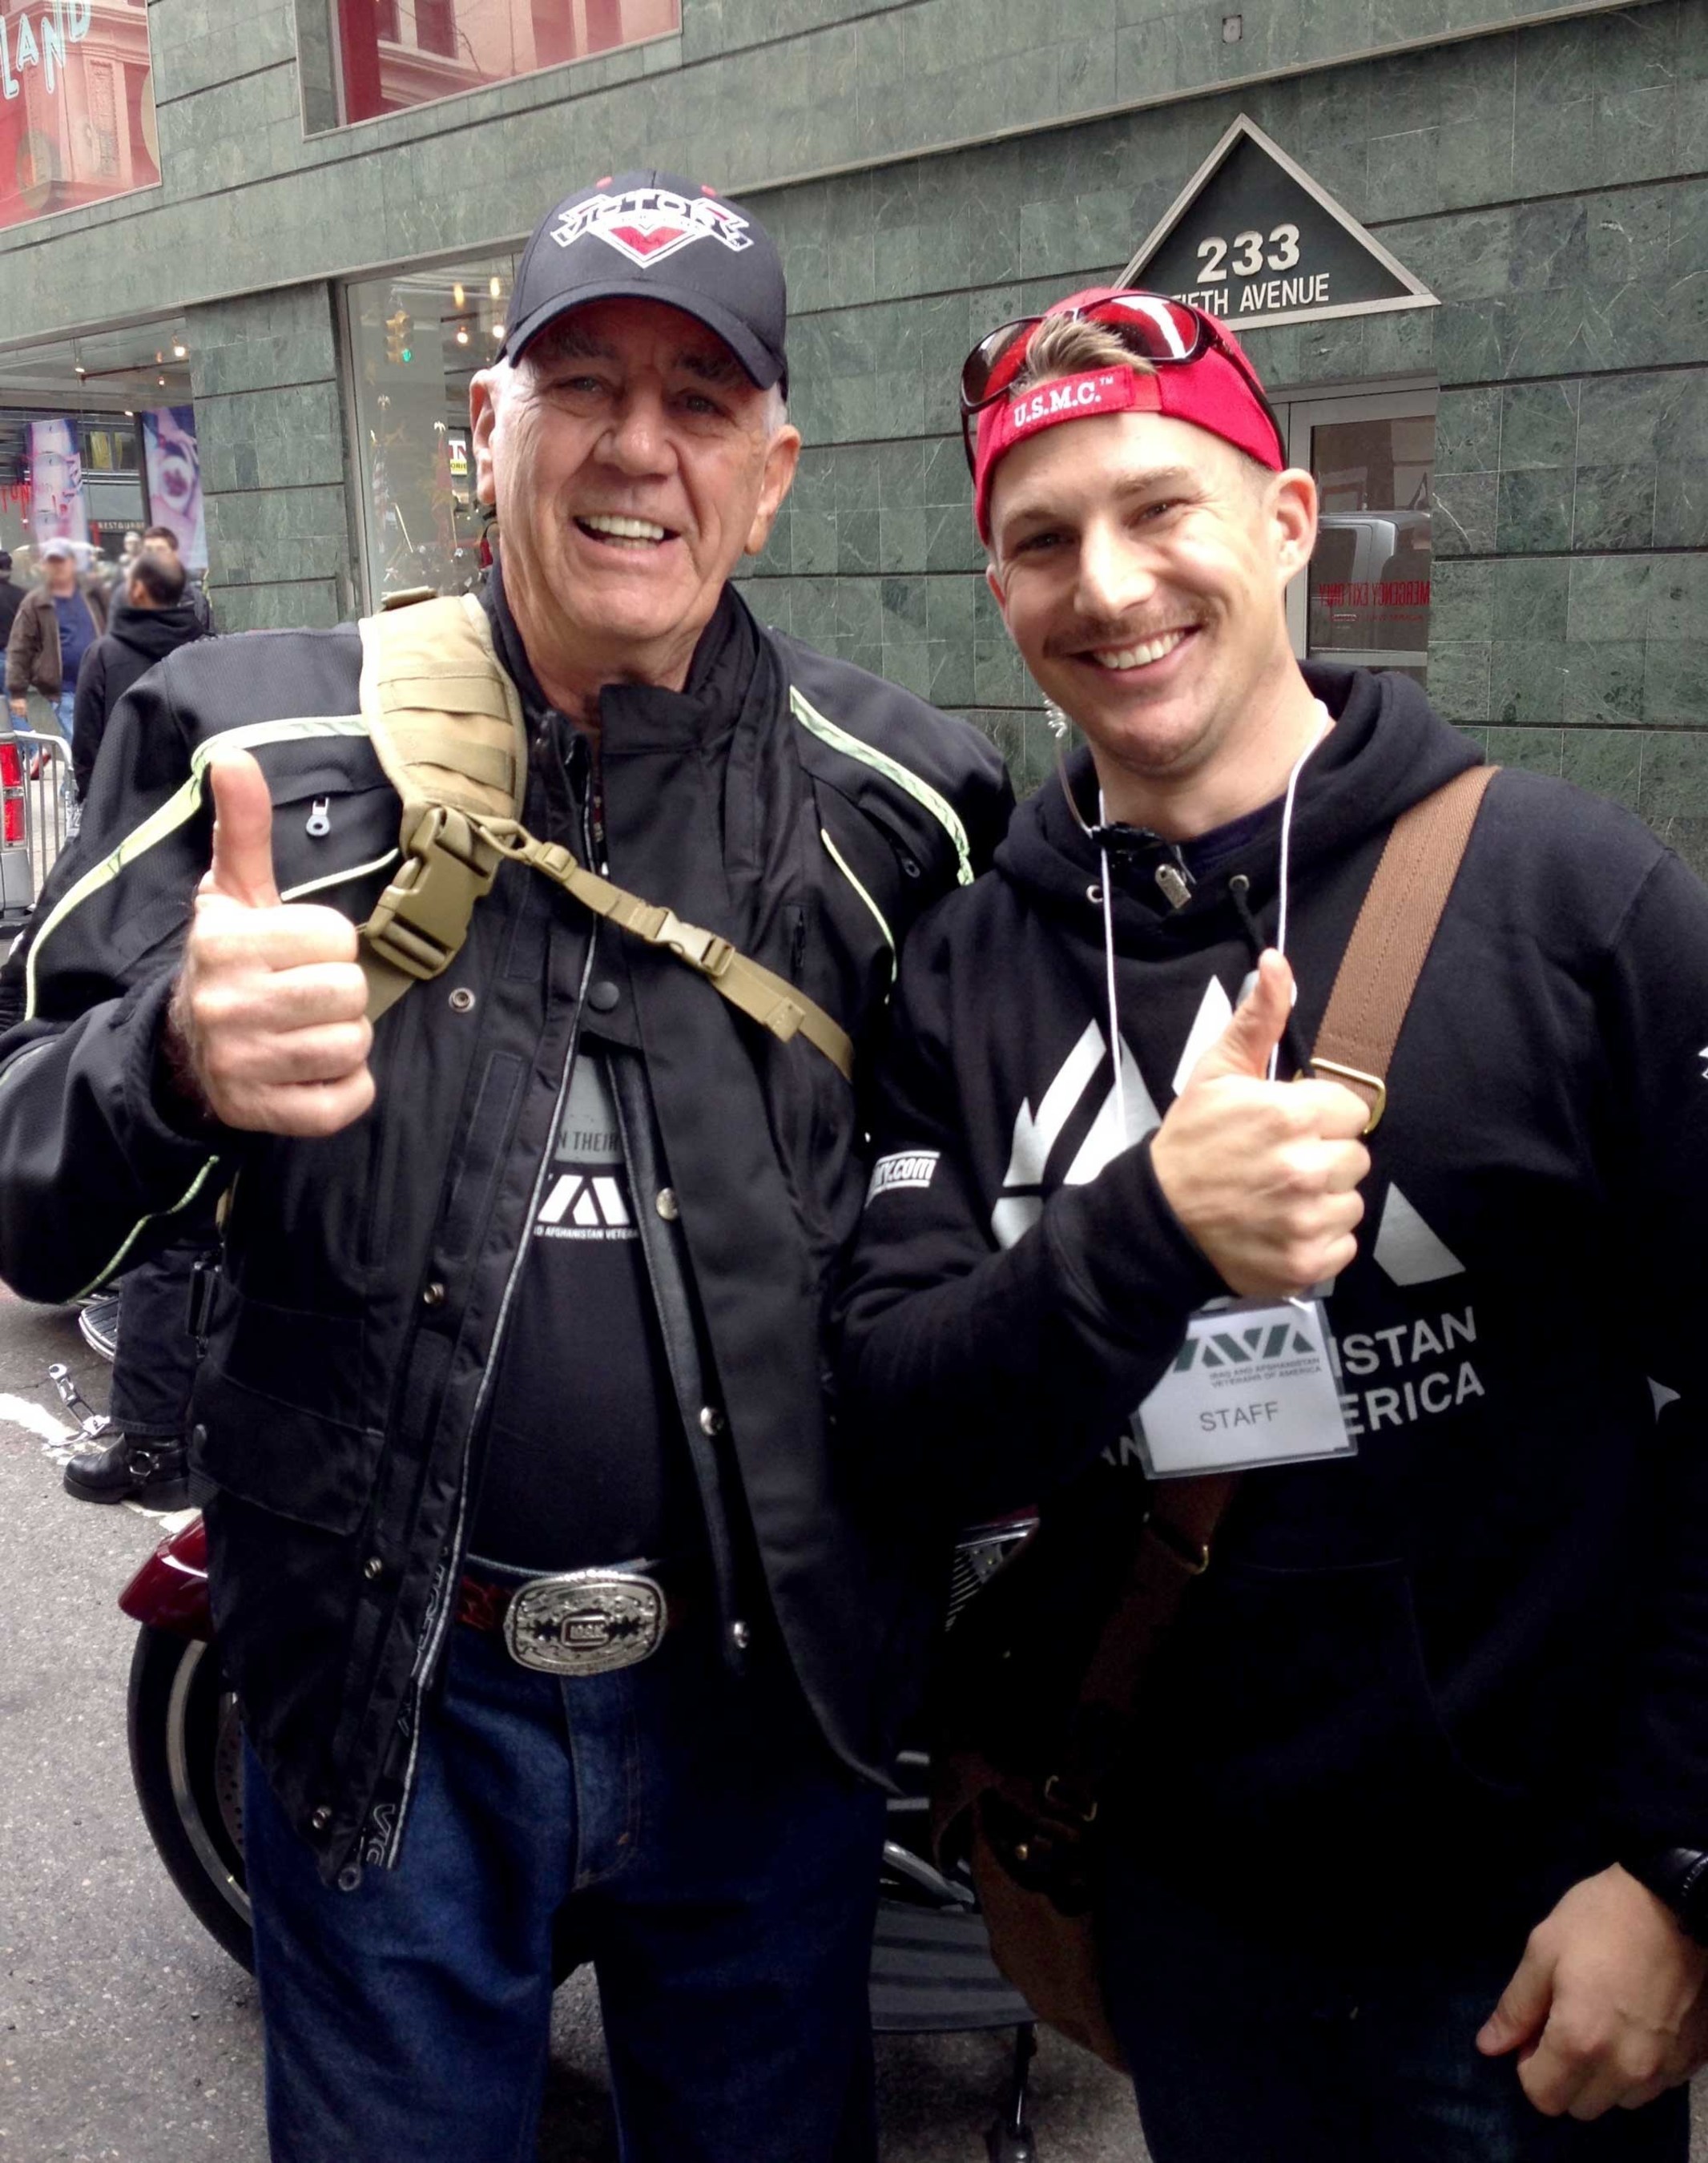 R. Lee Ermey with an IAVA volunteer at the 2014 America's Parade in New York City.